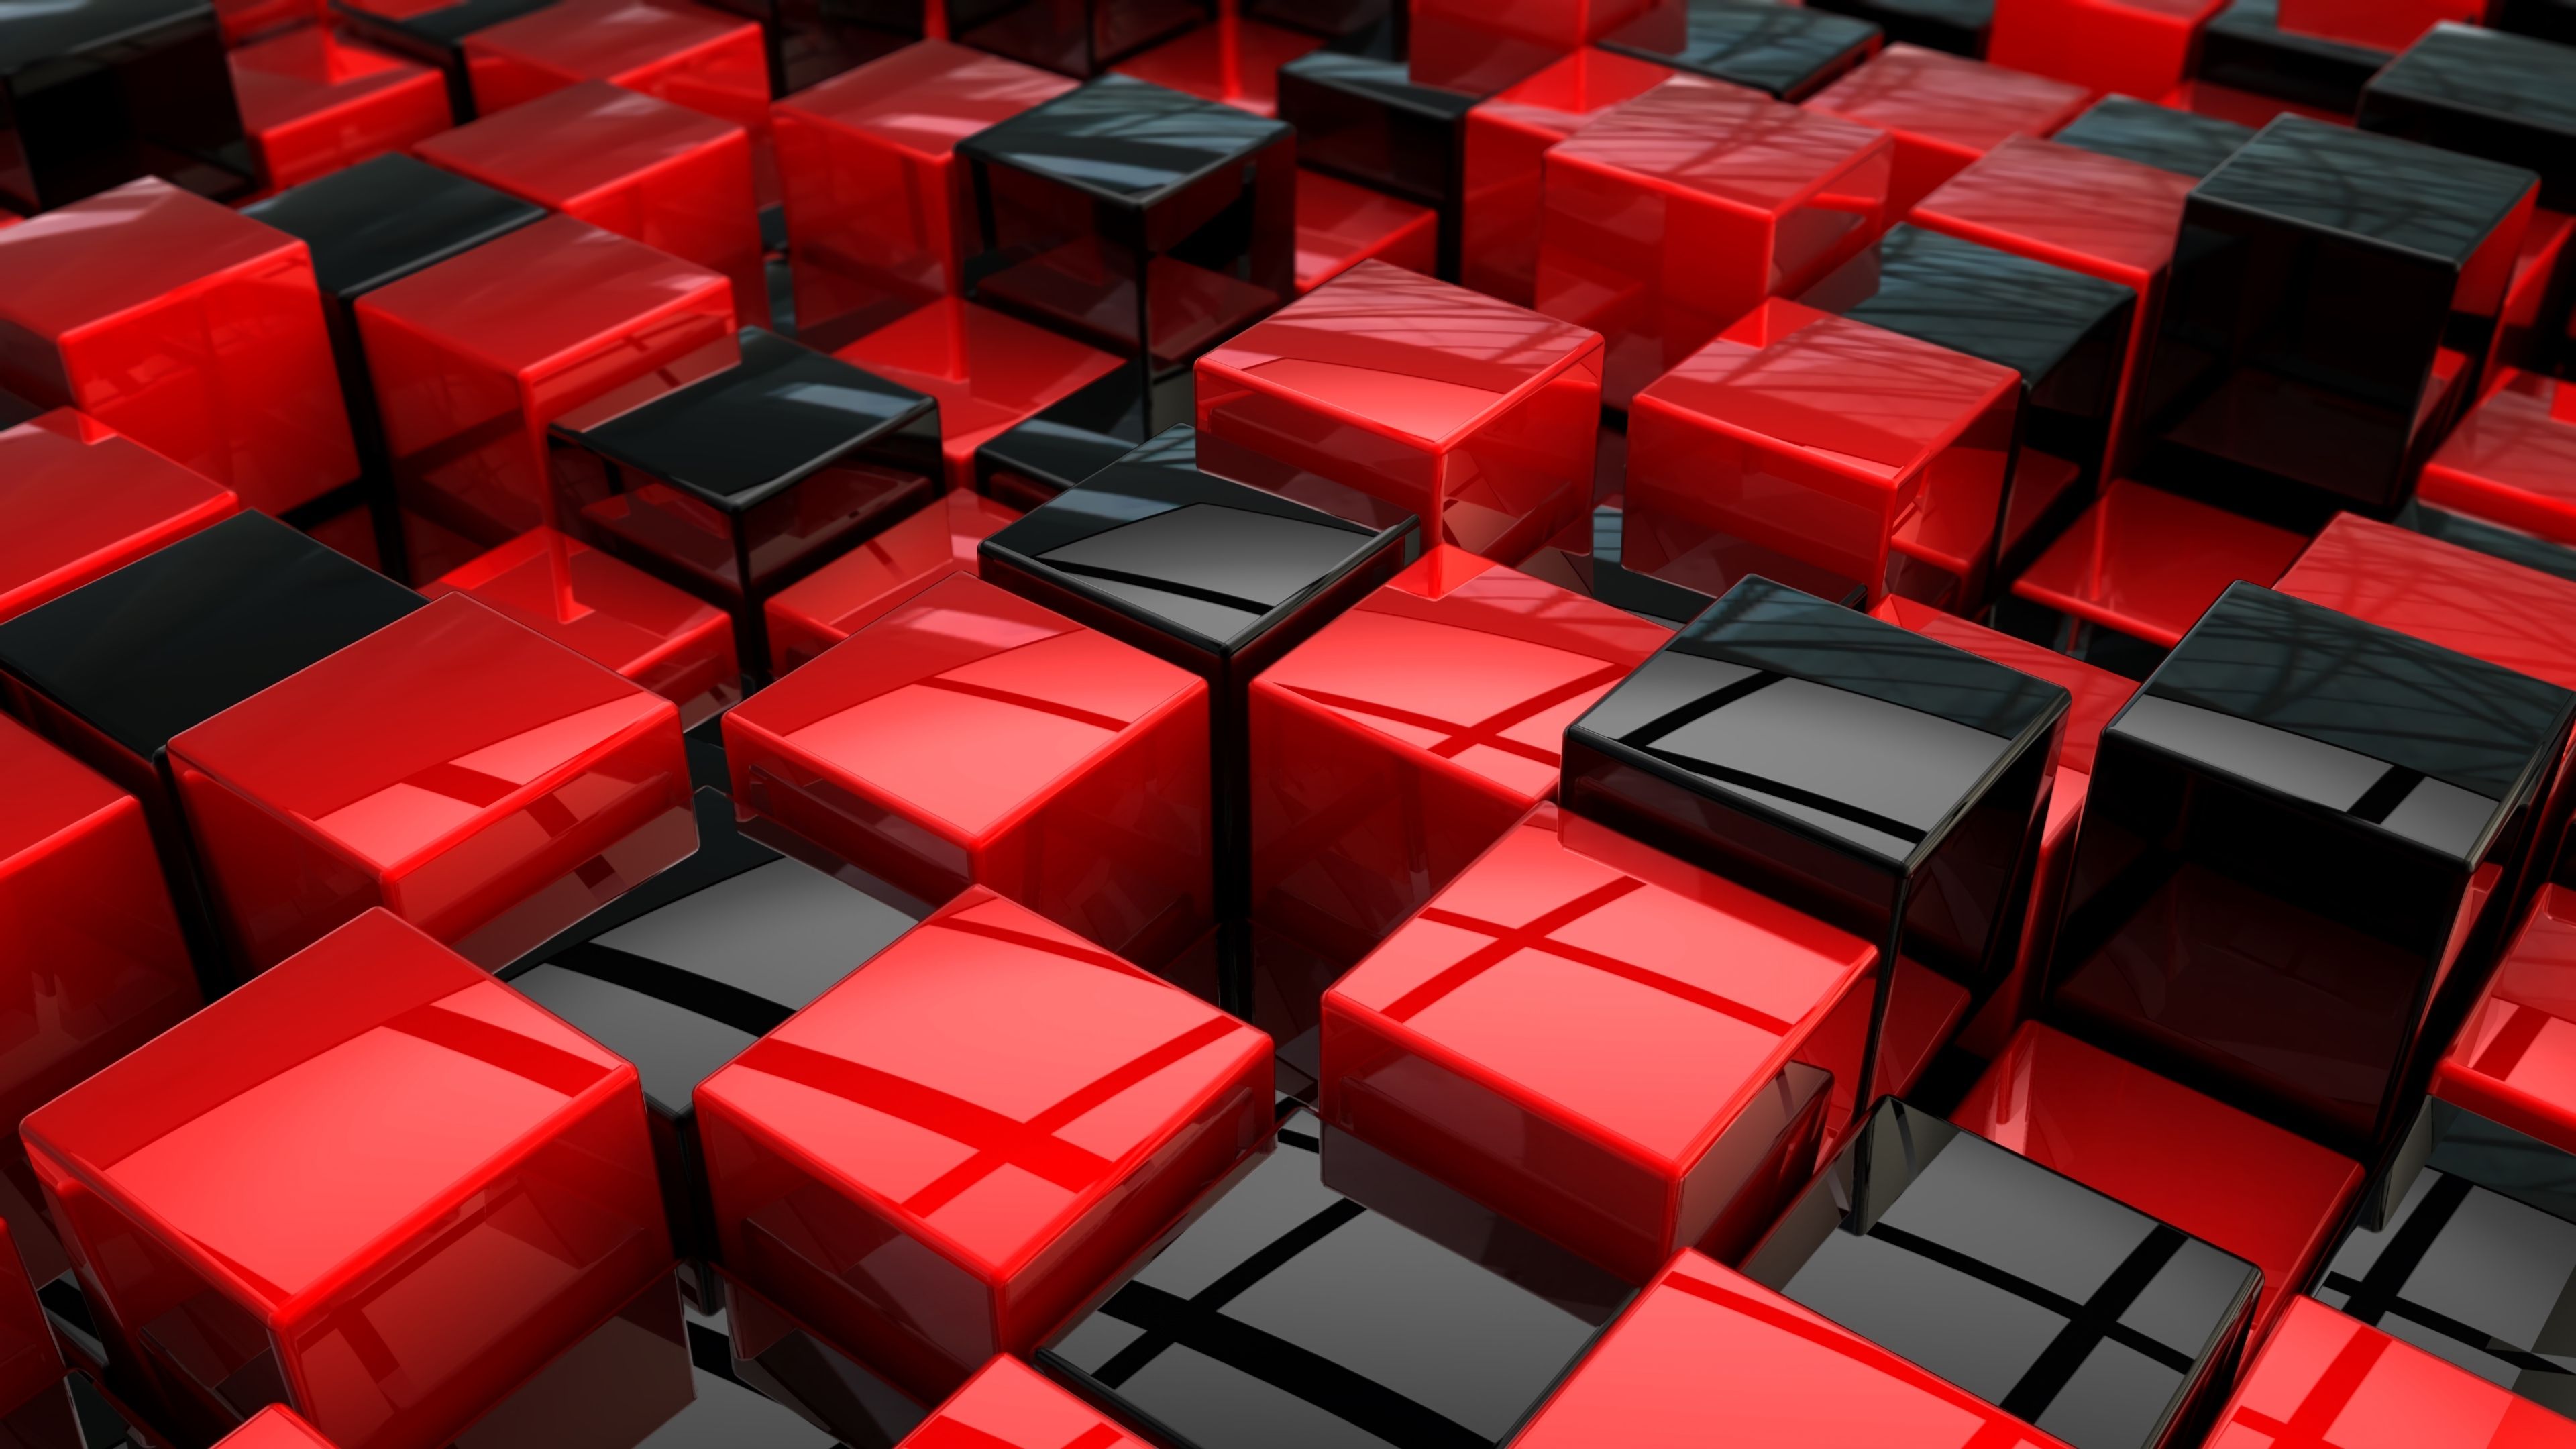 Download Cubes, red and black, pattern, surface wallpaper, 3840x 4K UHD 16: Widescreen